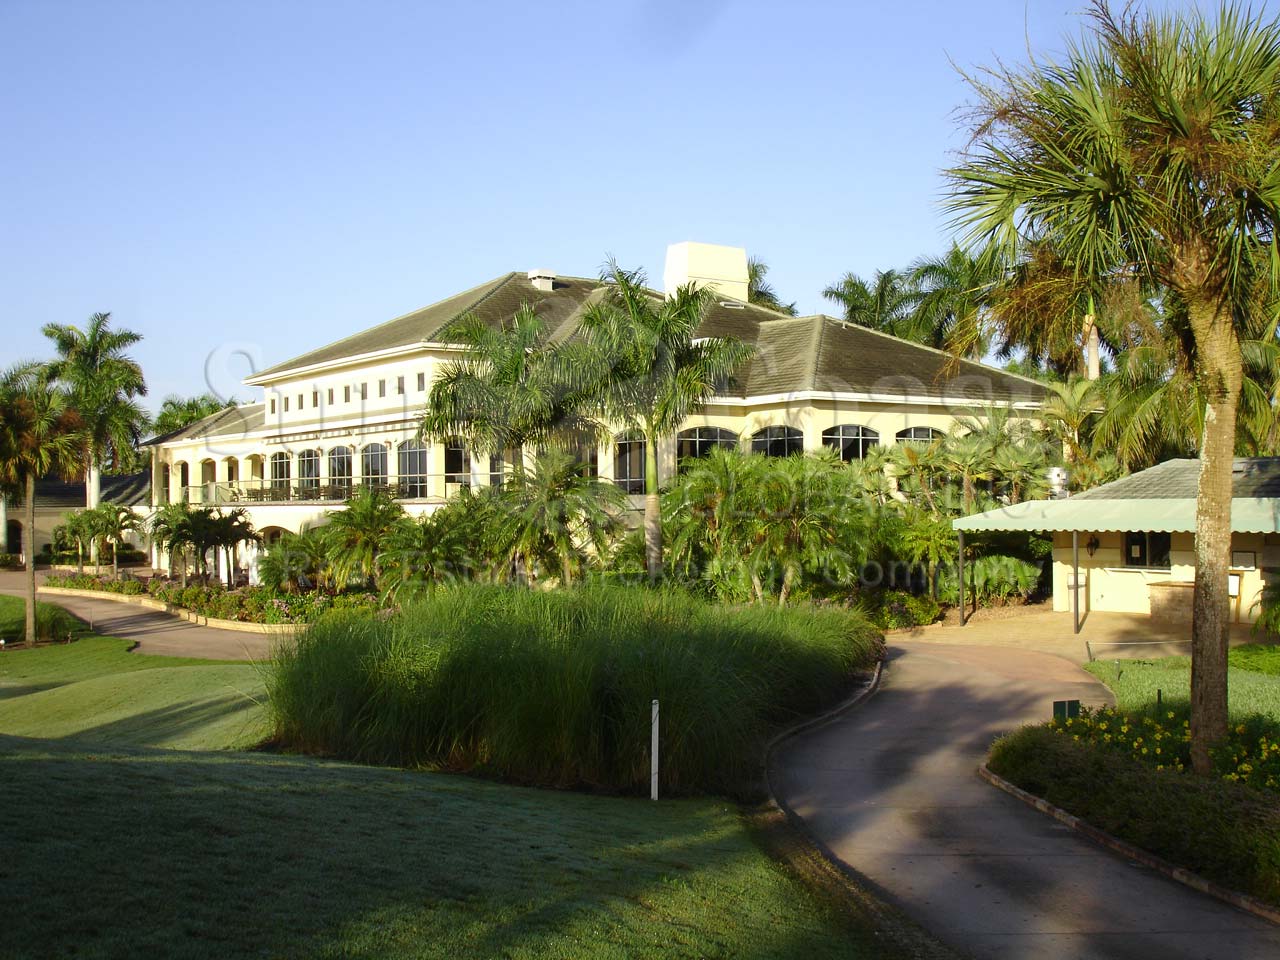 KENSINGTON Golf and Country Club